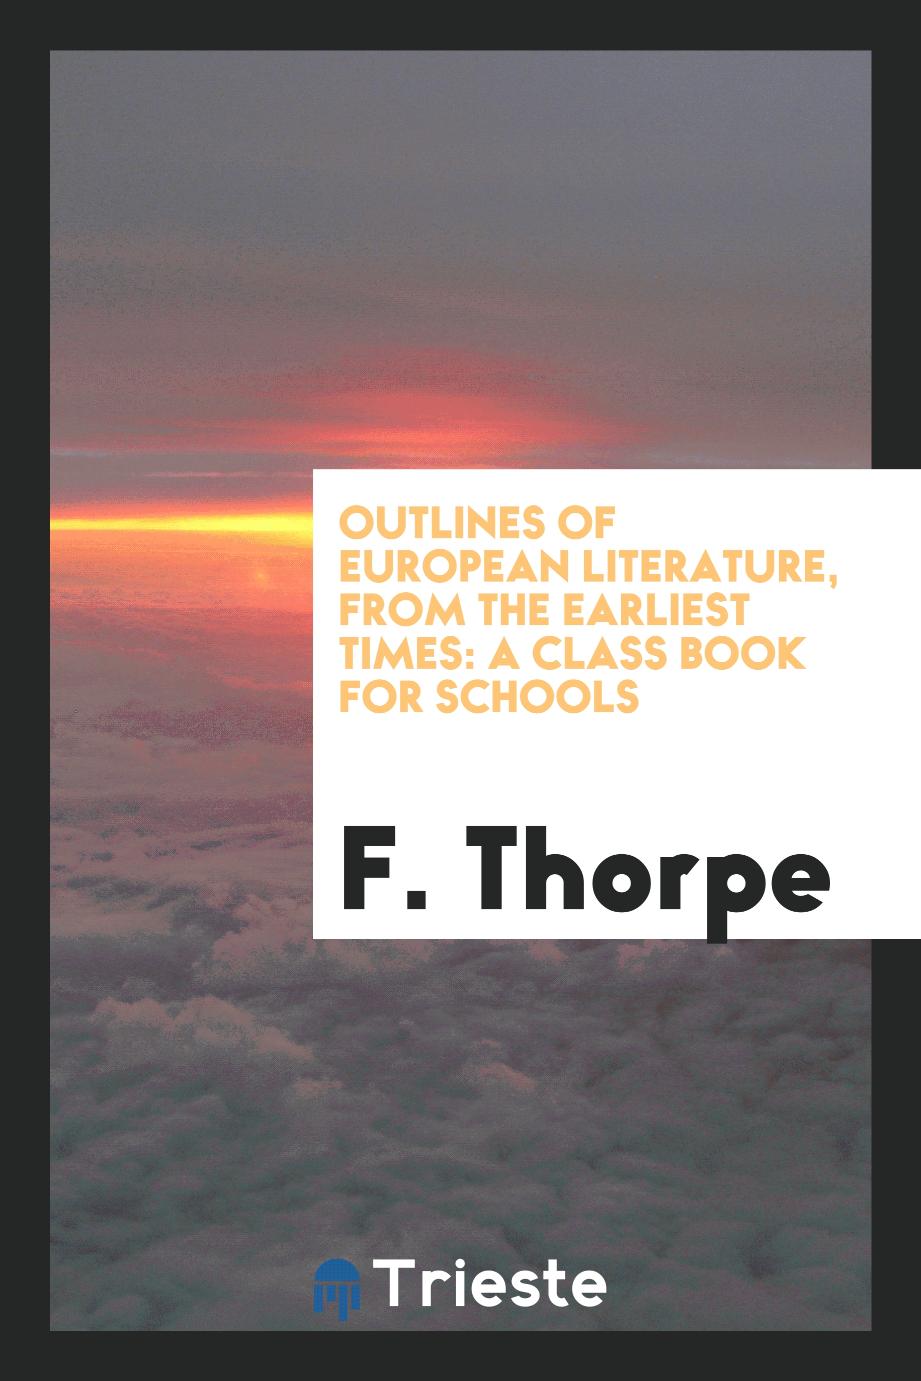 Outlines of European Literature, from the Earliest Times: A Class Book for Schools